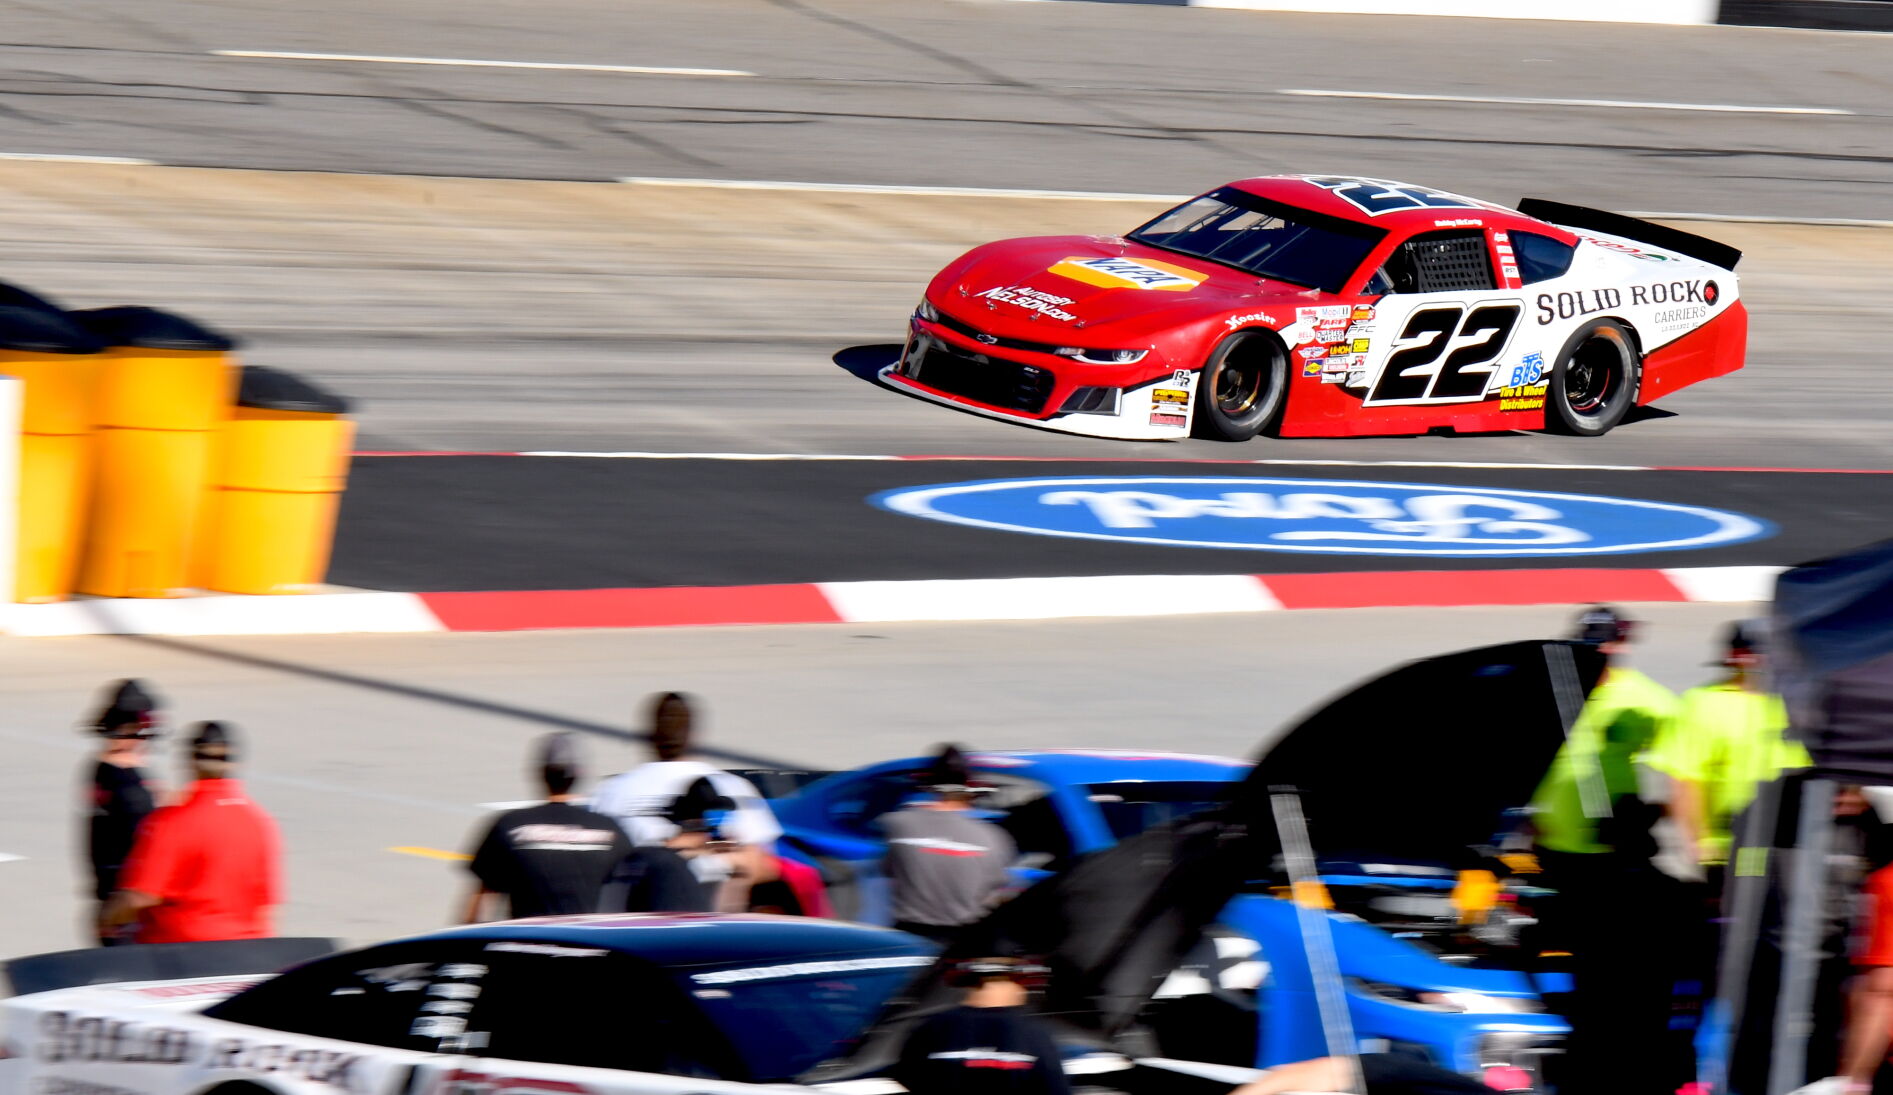 VSCU300 at Martinsville Speedway Bobby McCarty wins qualifying for Nelson Motorsports